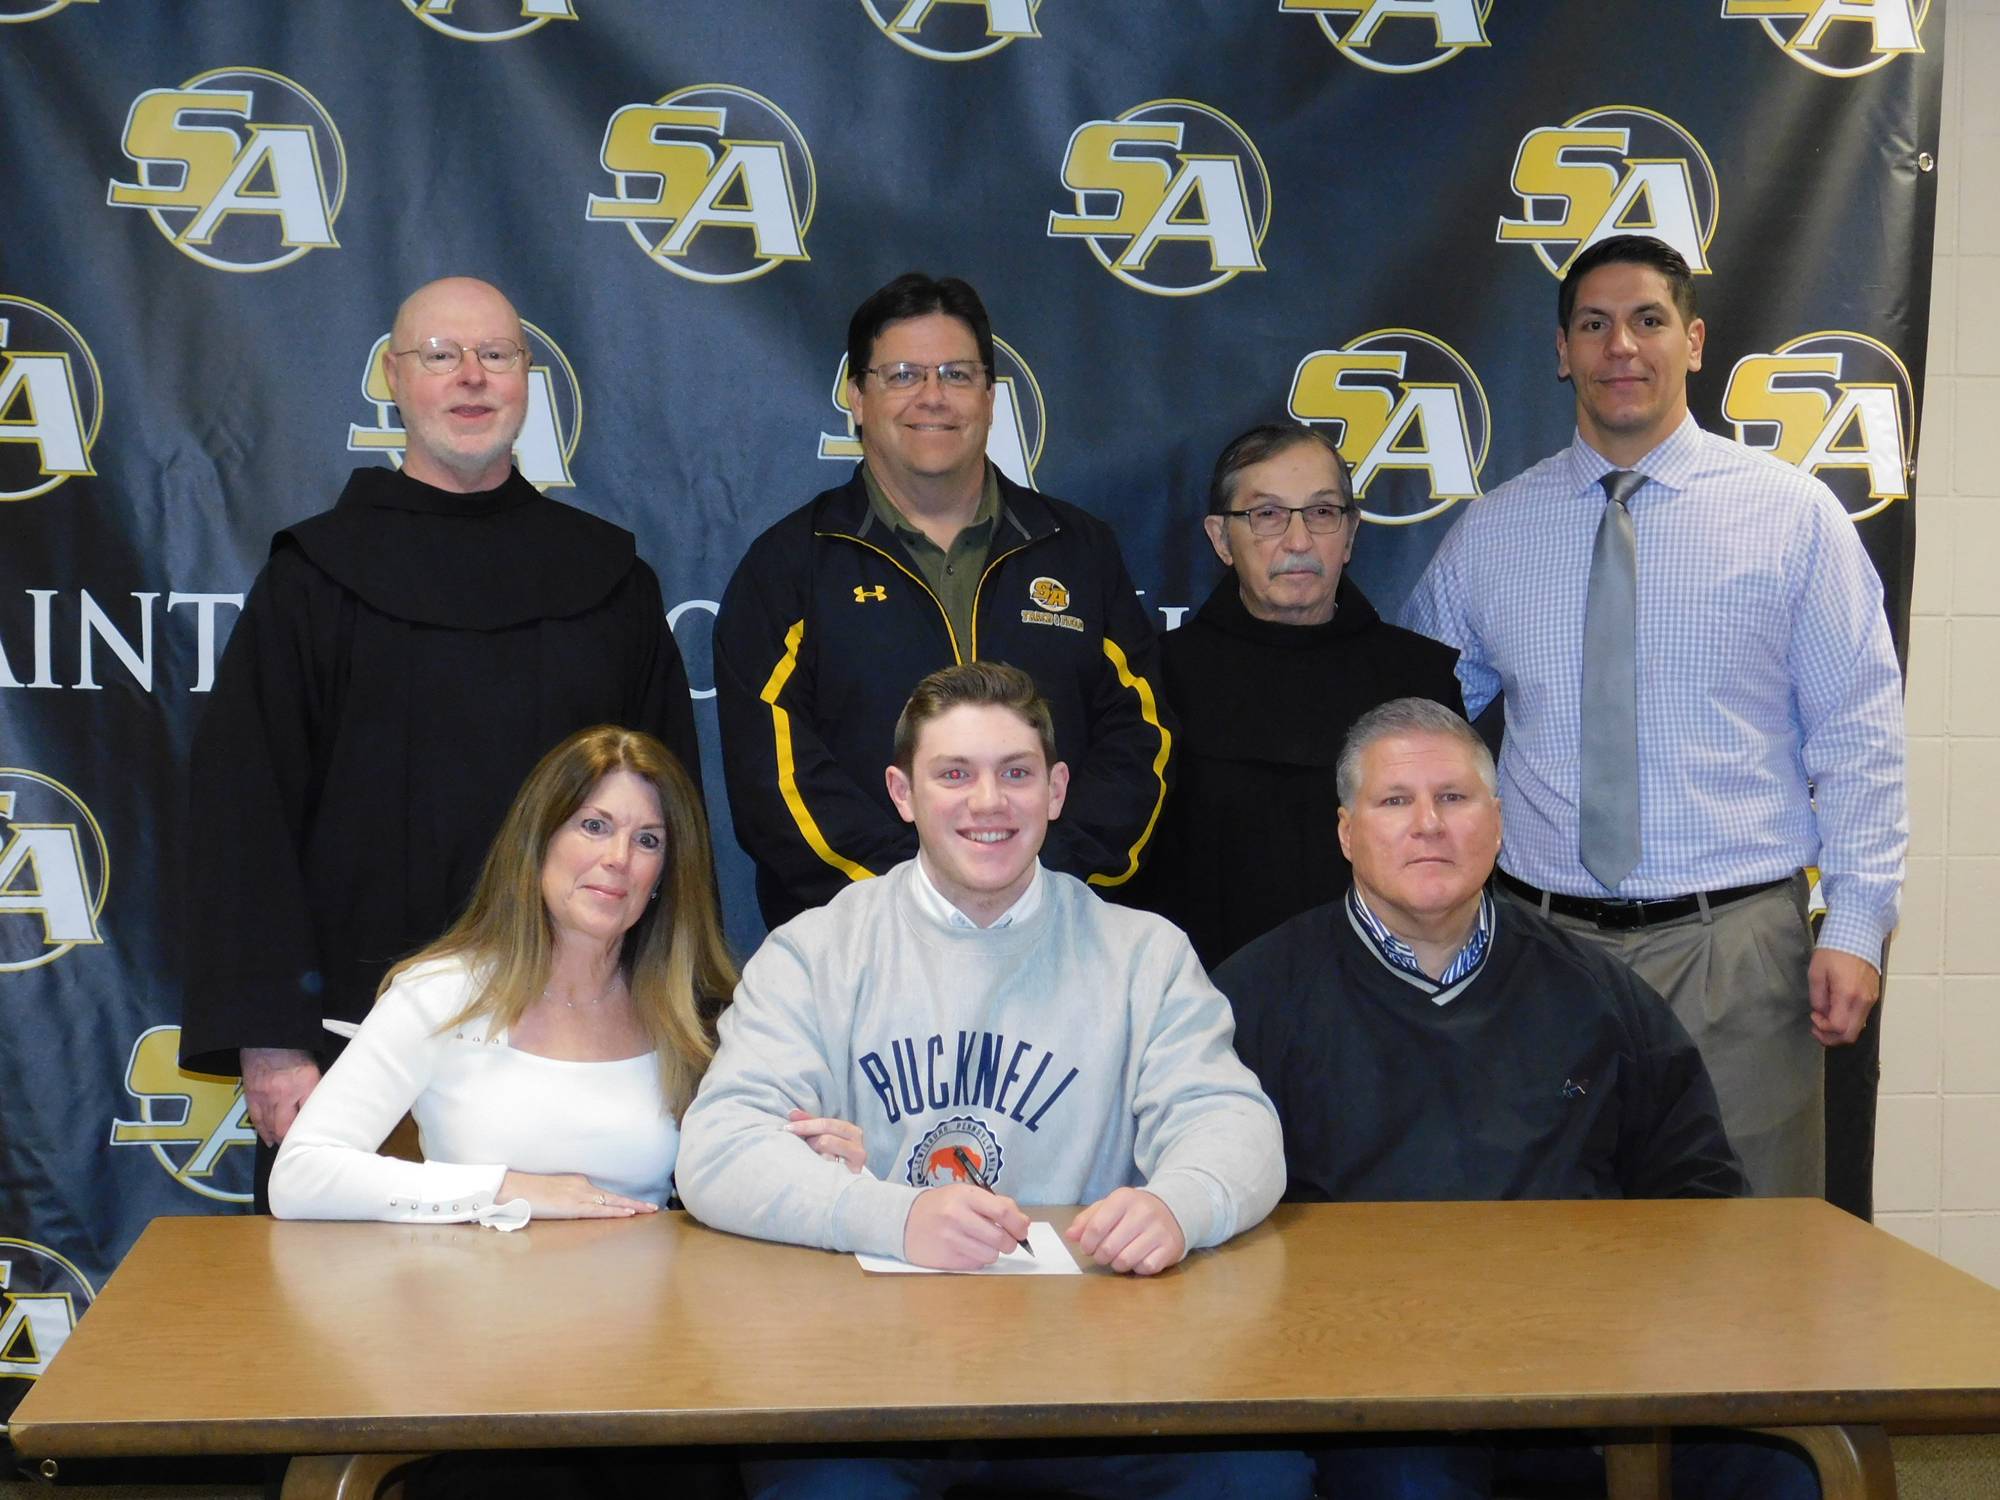 Congratulations to John Calisi on his commitment to Bucknell University for Track & Field